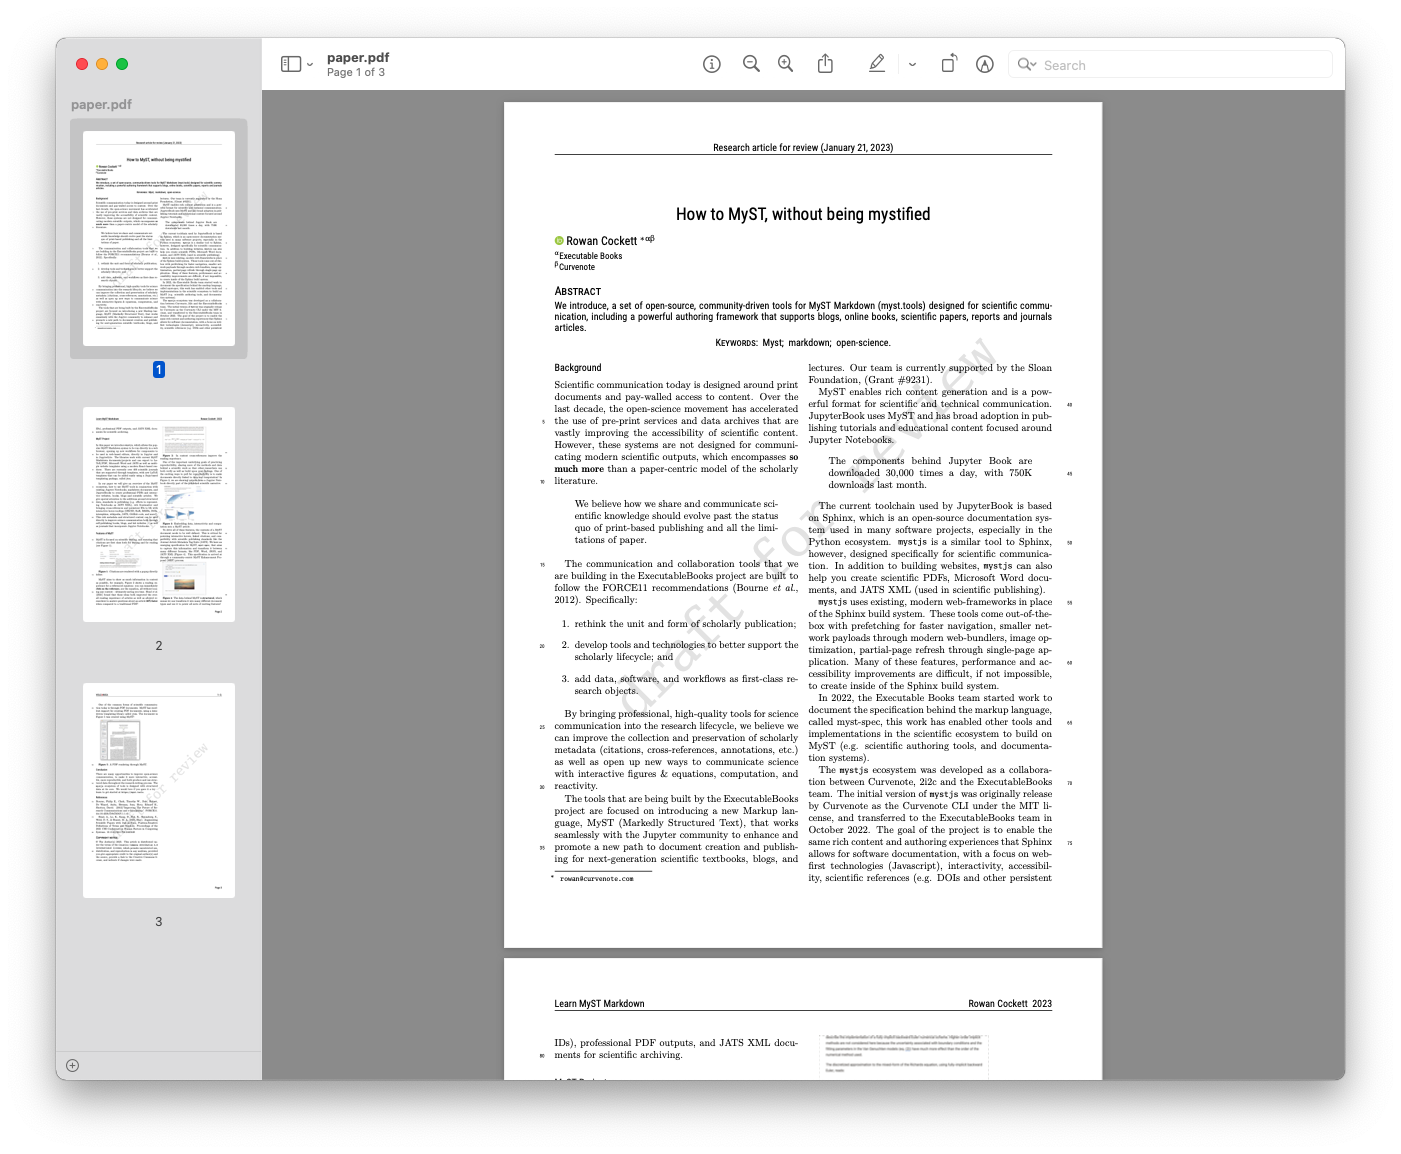 Exporting the article to a two column PDF with appropriate metadata to submit to a Journal.